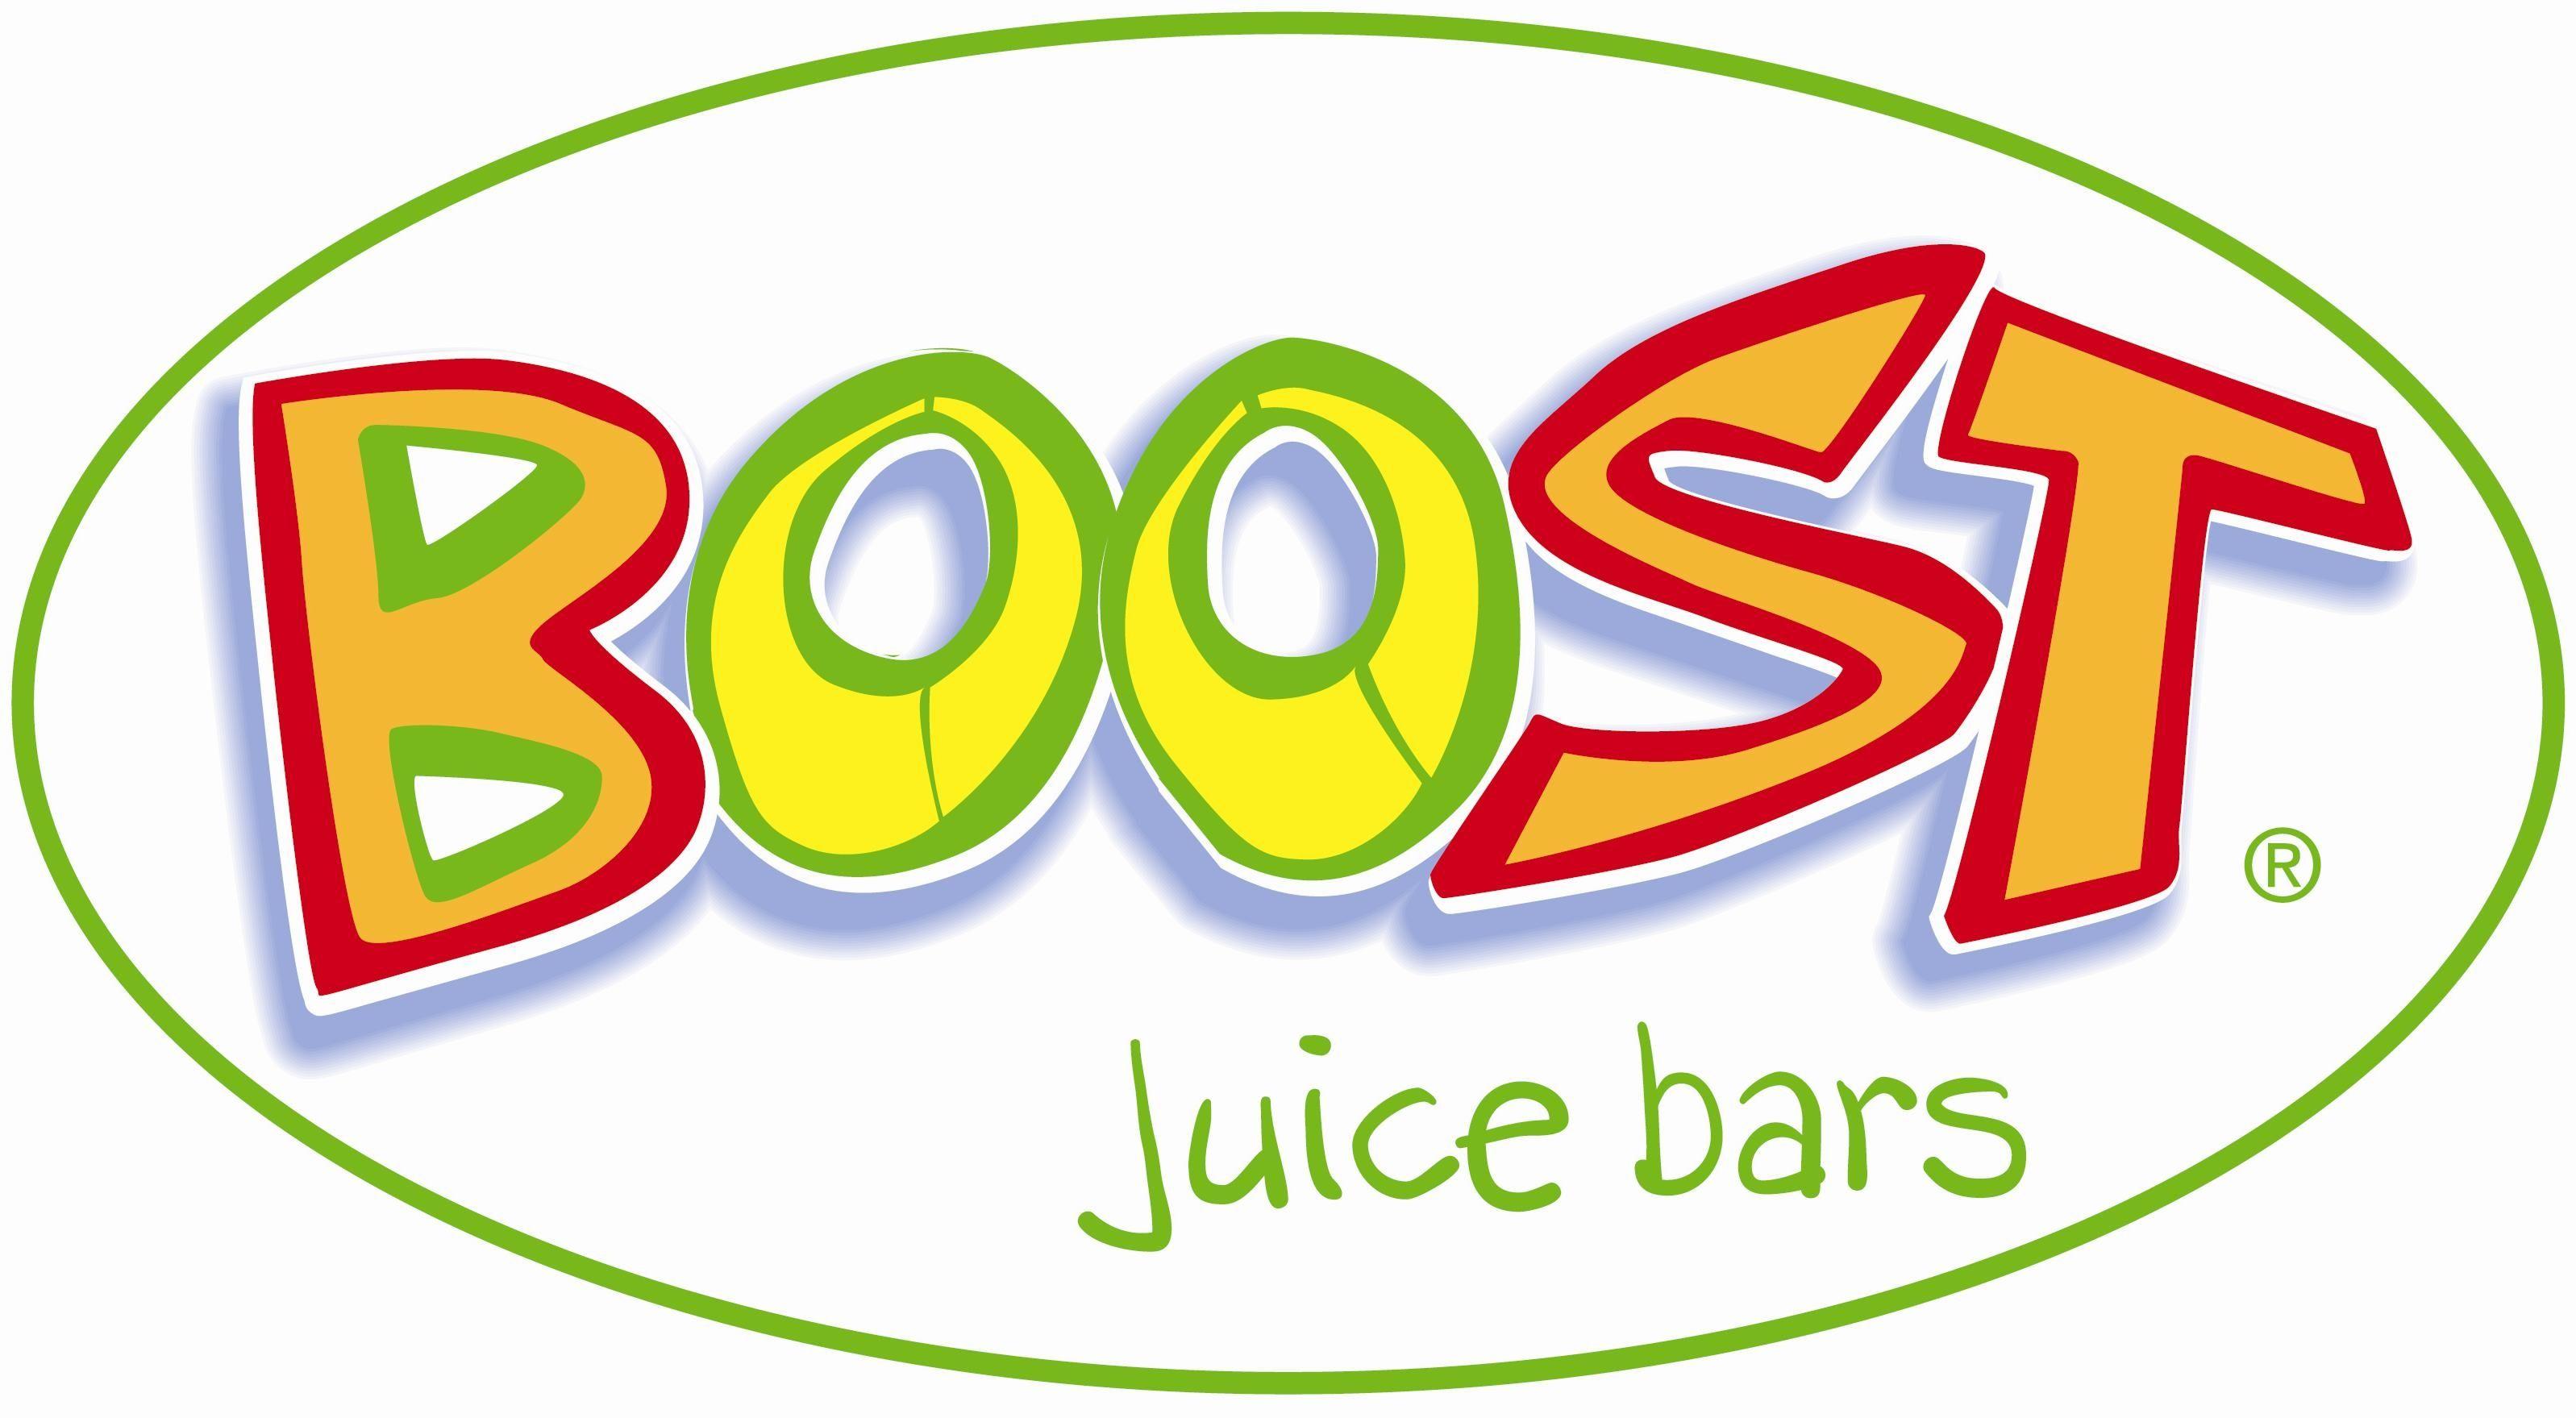 Boost Nutritional Drink Logo - Boost UPC & Barcode | Buycott